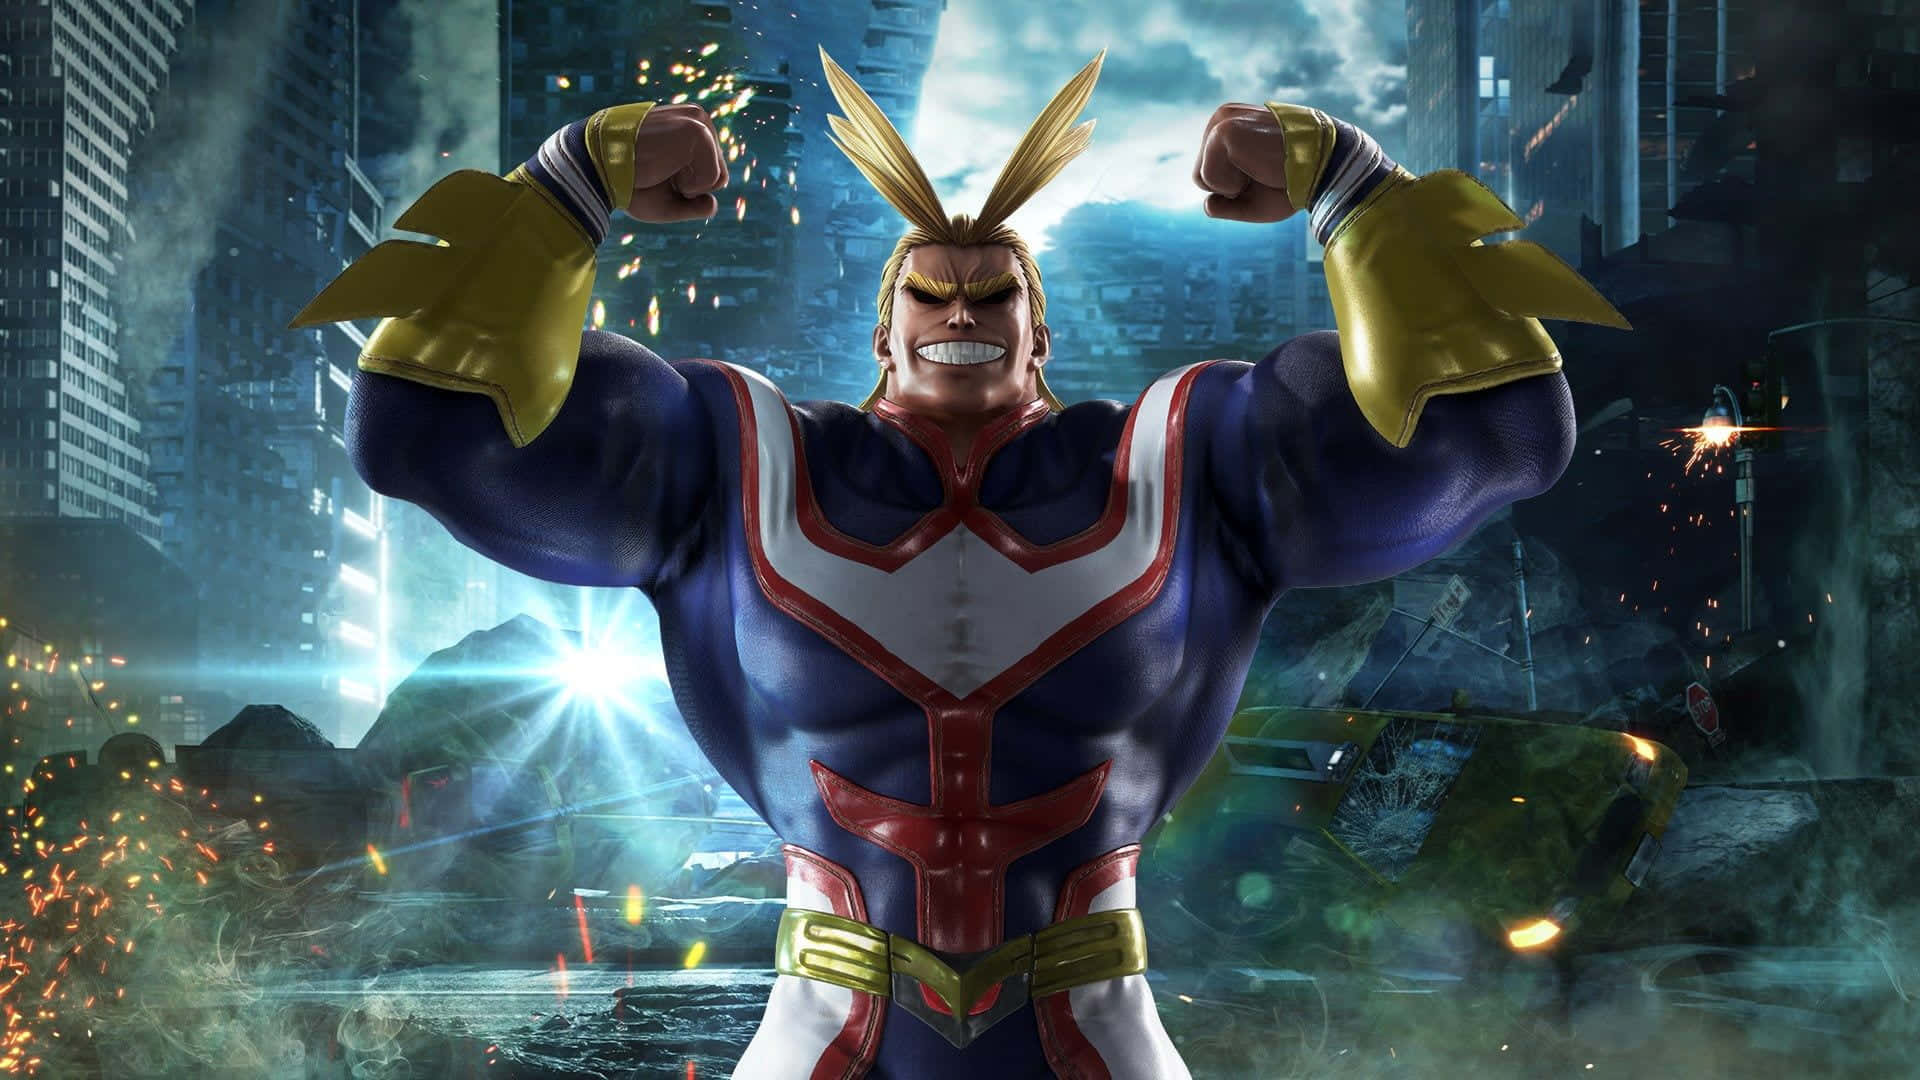 Imagende All Might Musculoso